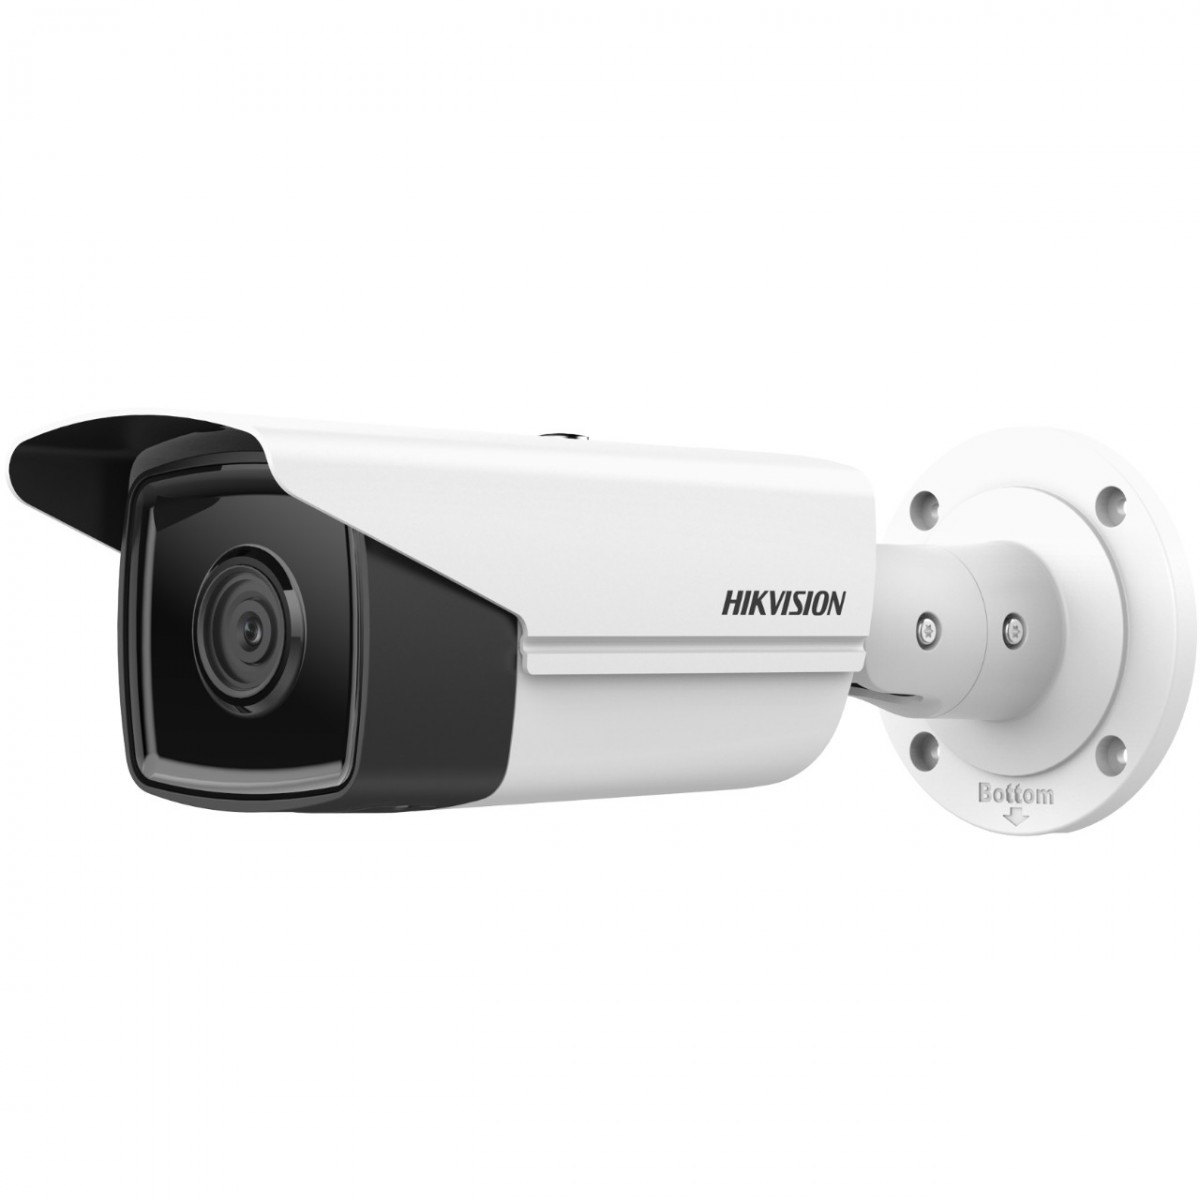 Hikvision Digital Technology DS-2CD2T43G2-4I - IP security camera - Outdoor - Wired - FCC SDoC (47 CFR 15 - B); CE-EMC (EN 55032